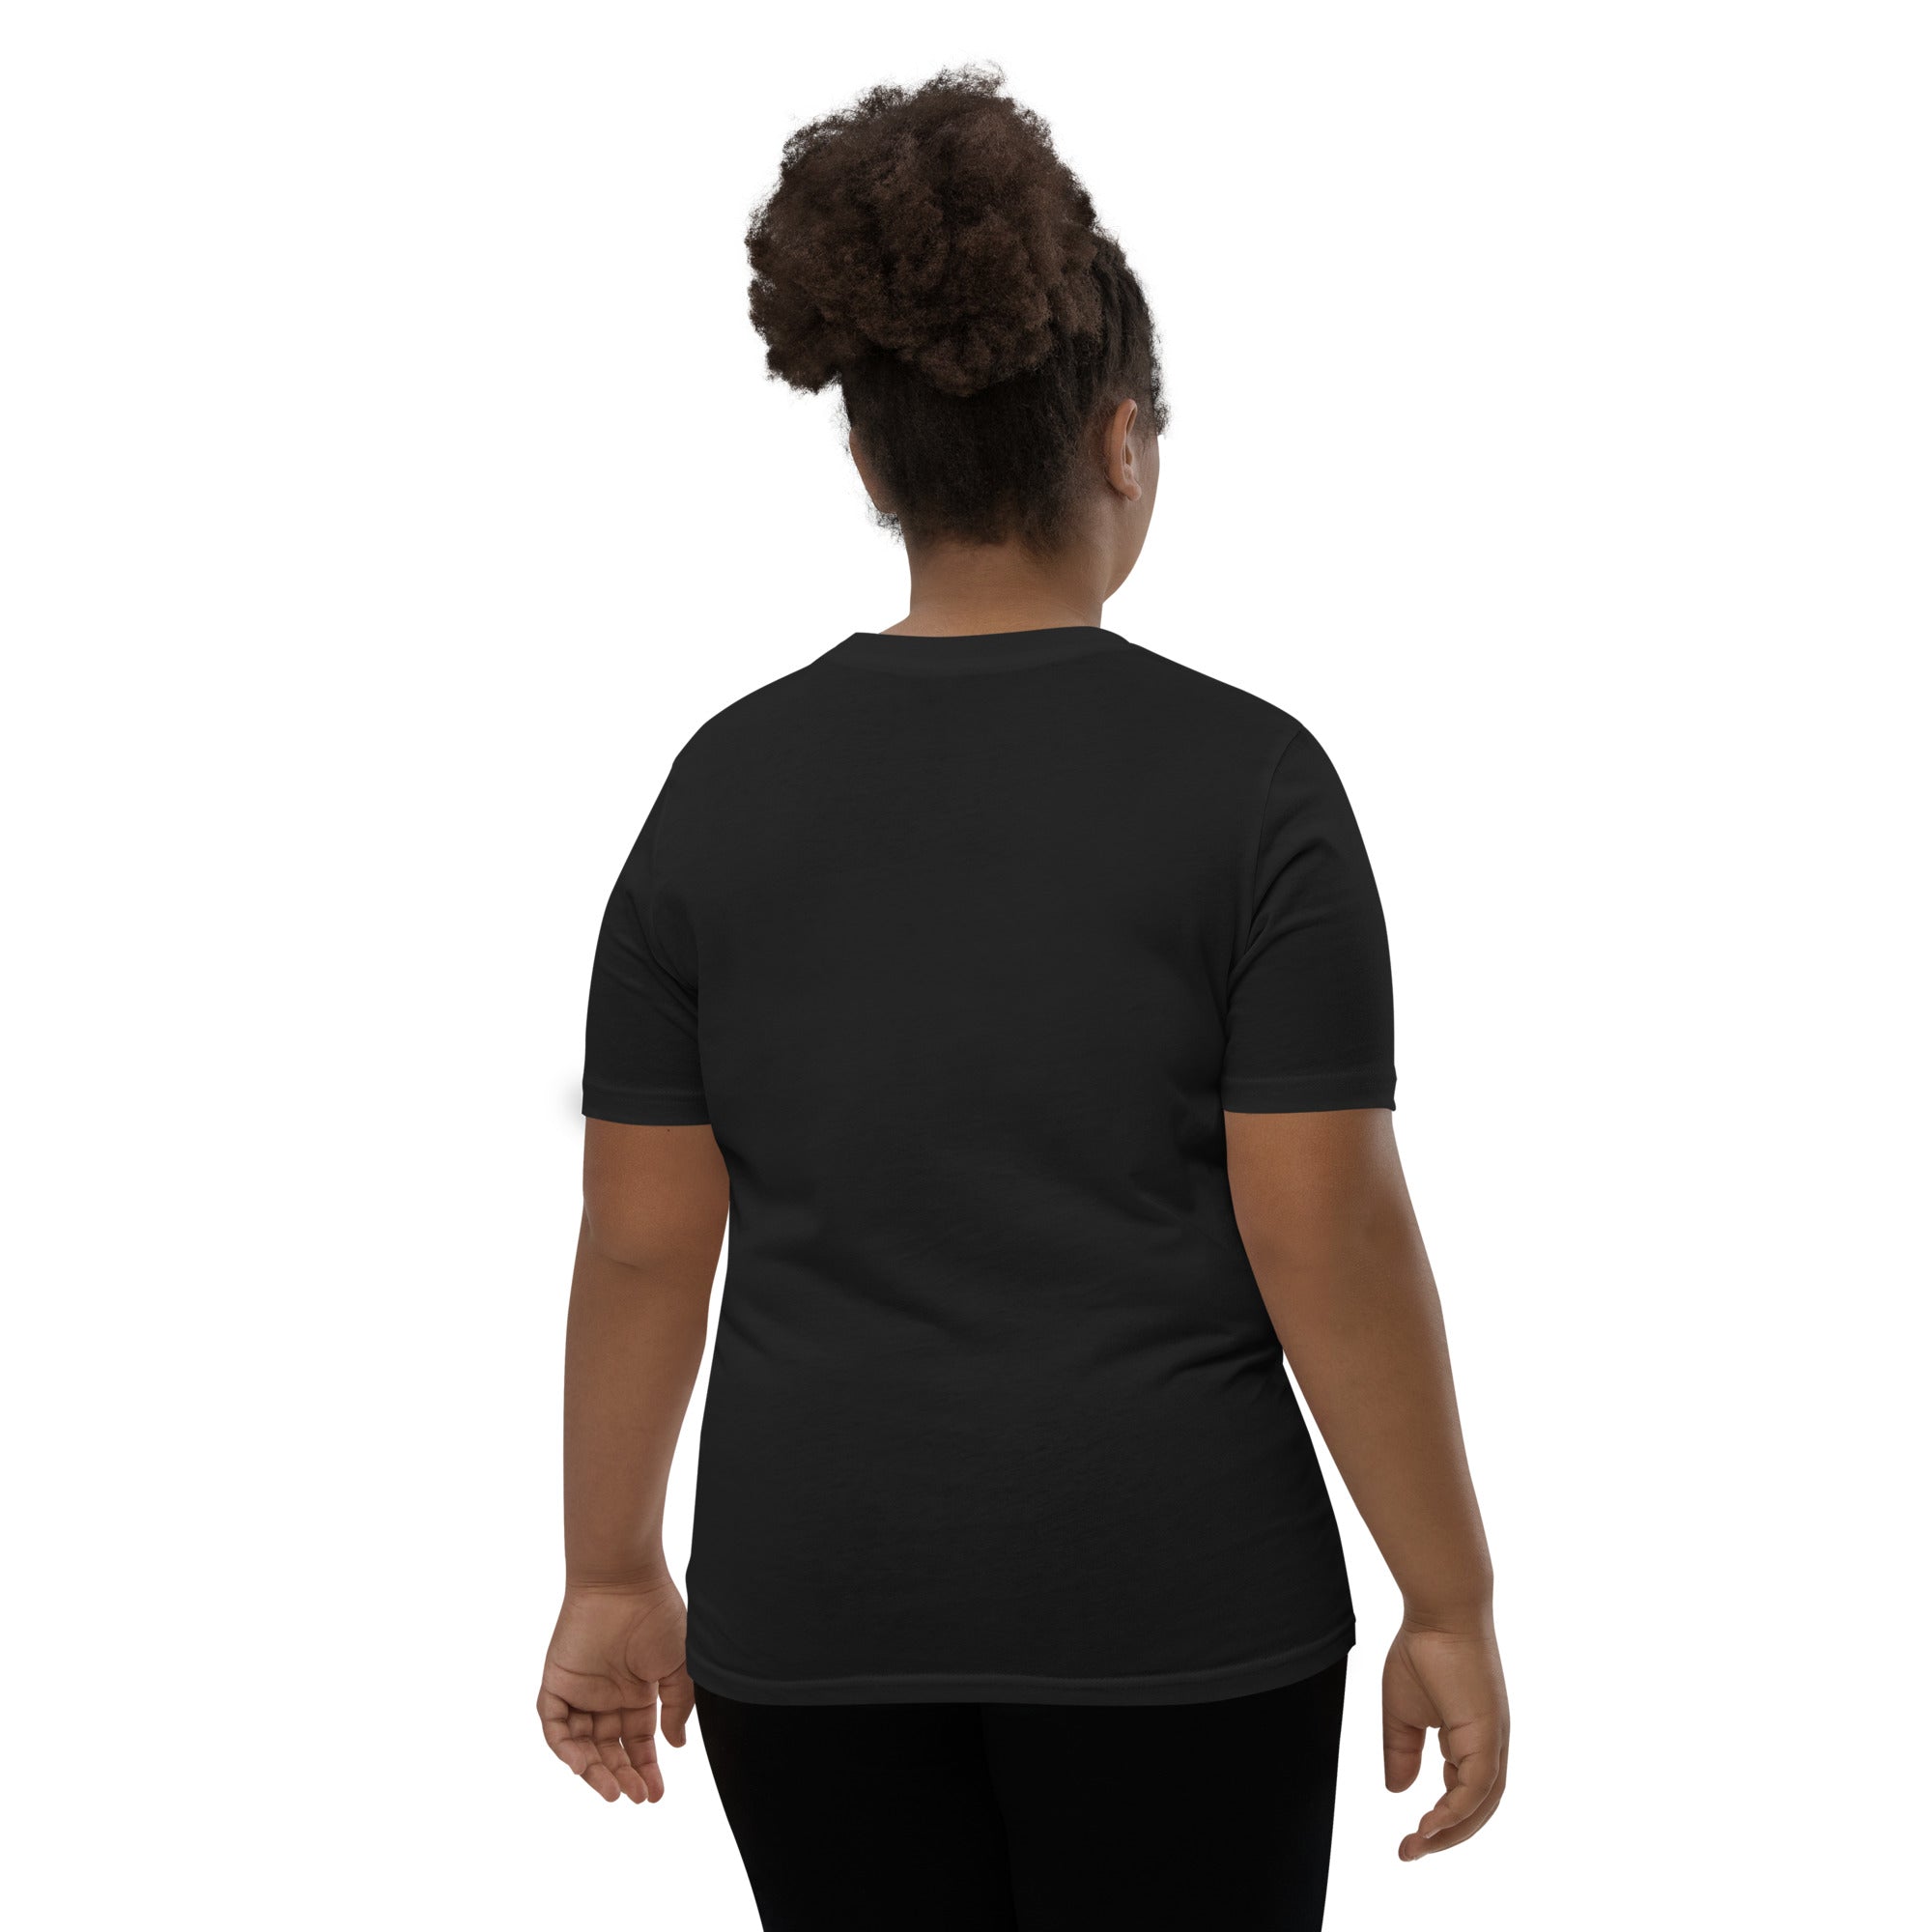 Coppell Logo R/W - Black Youth Short Sleeve T-Shirt